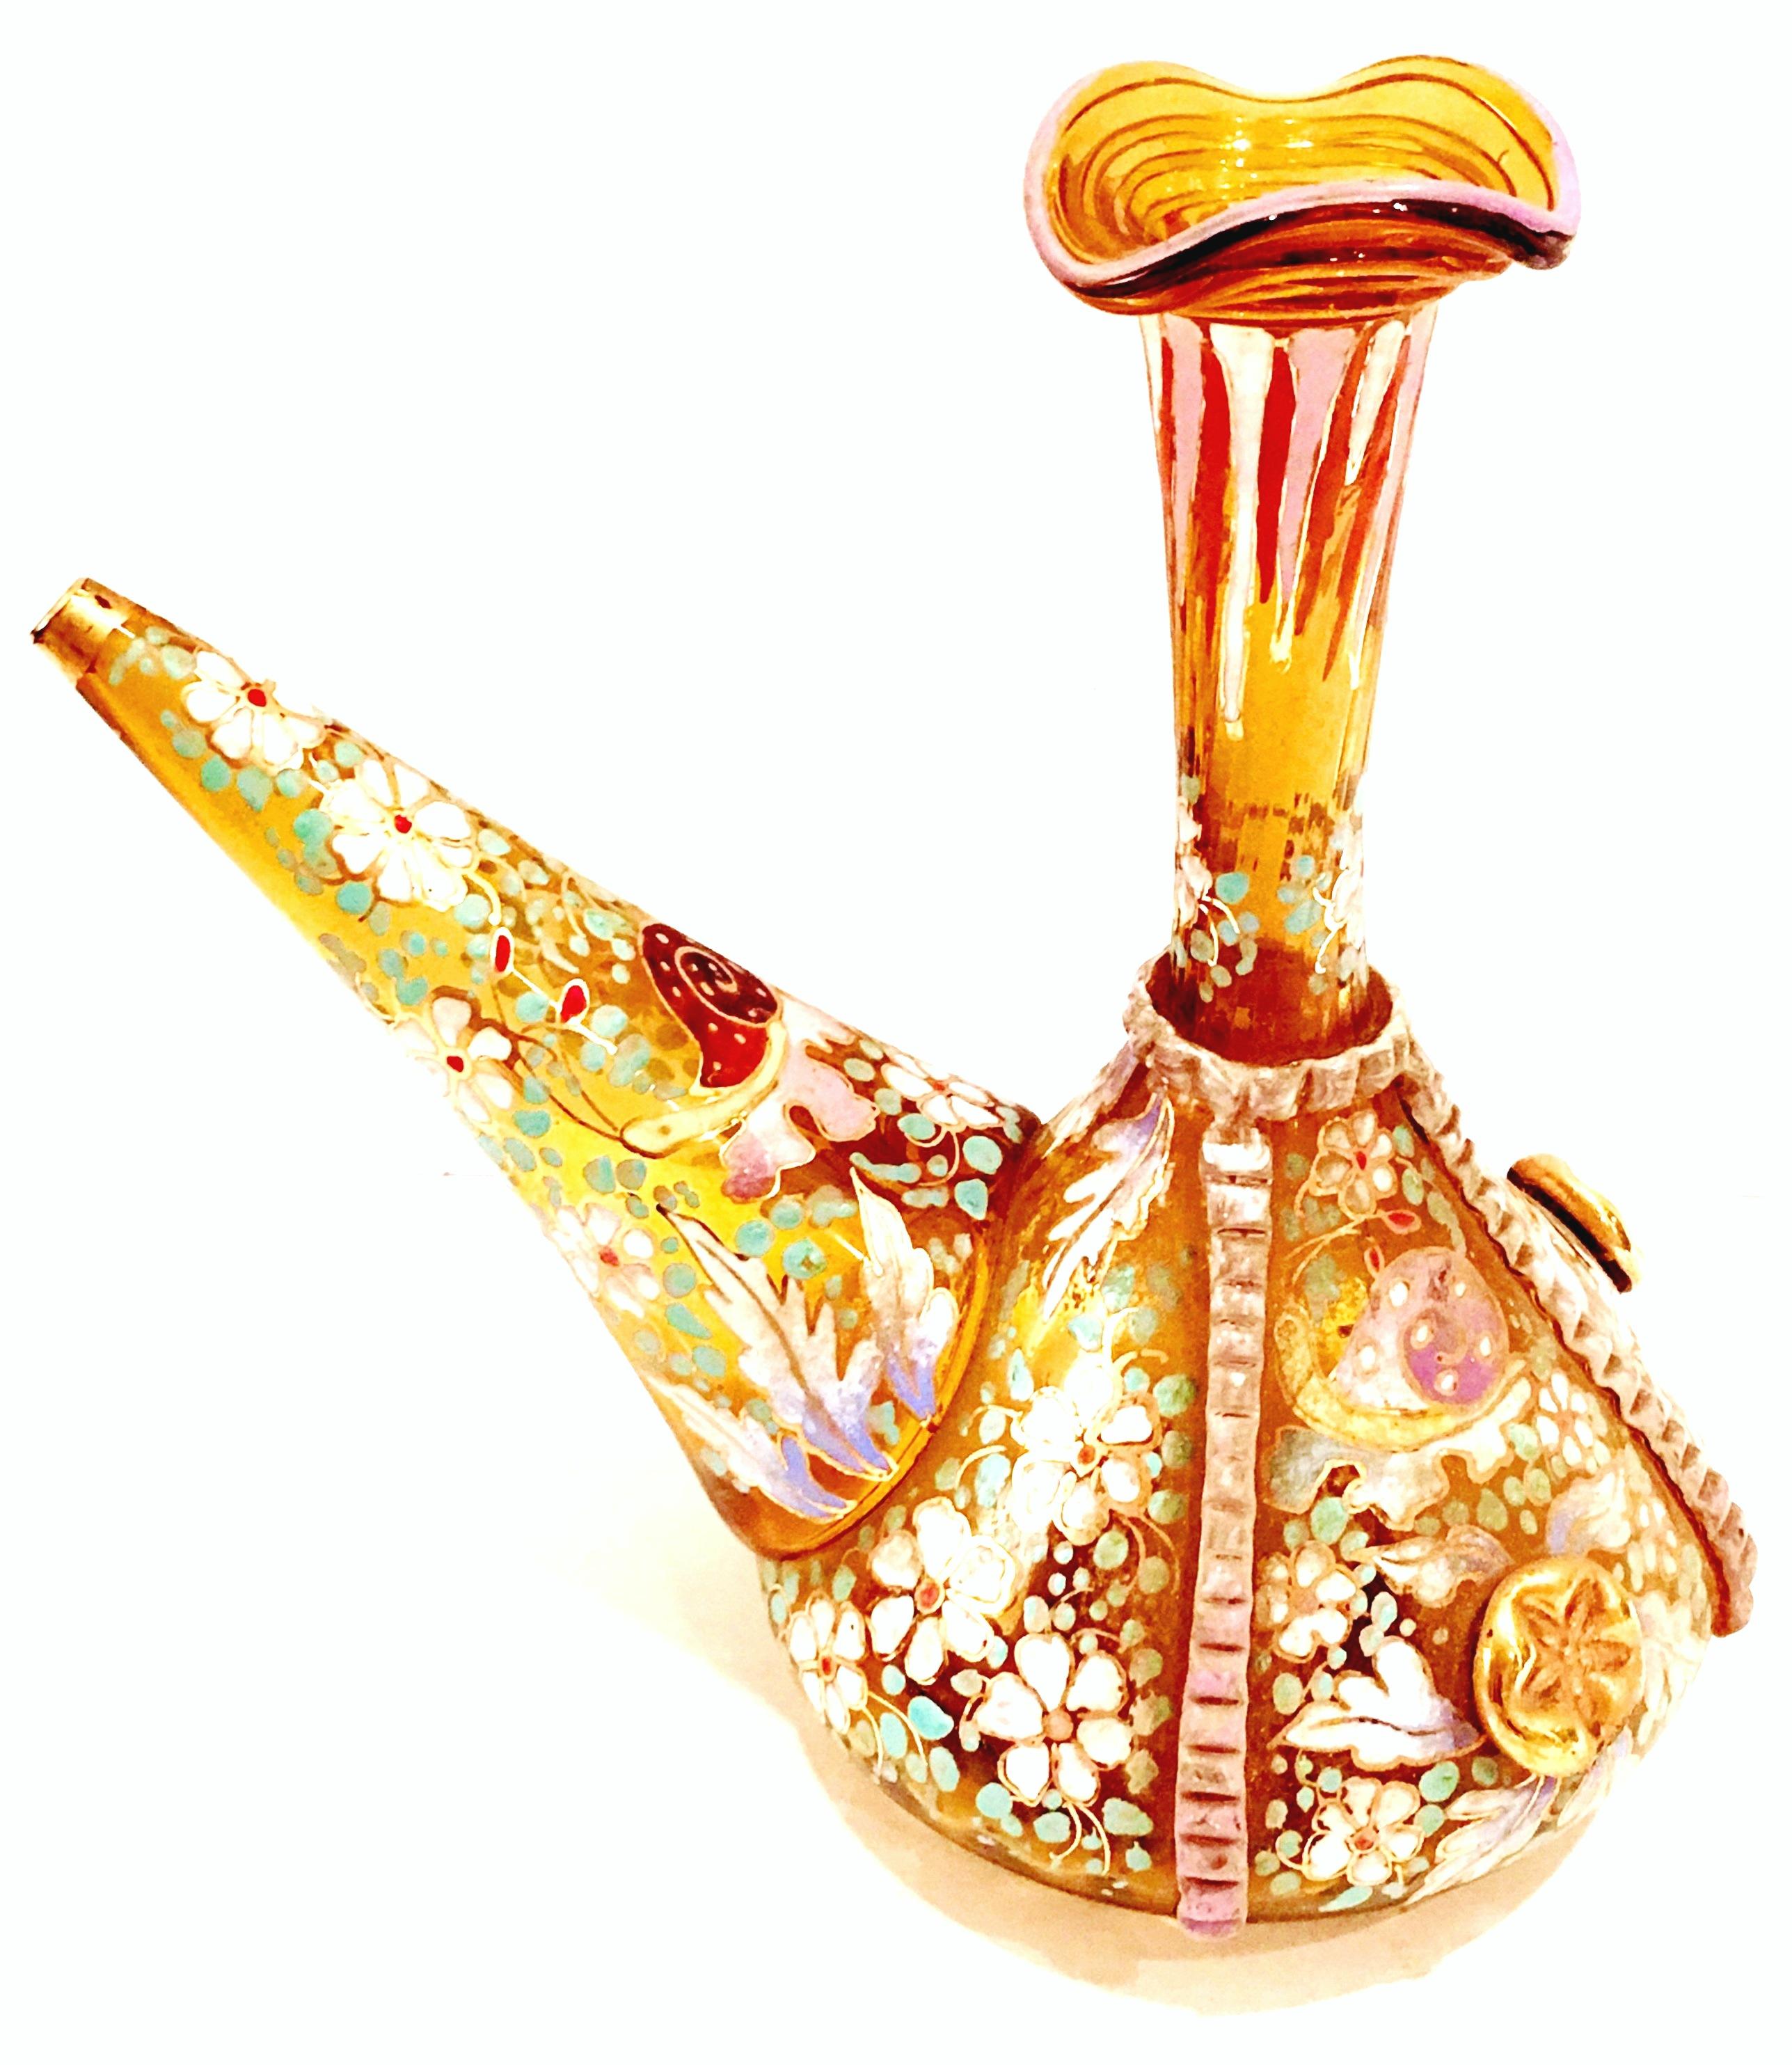 Hand-Crafted 20th Century Spanish Blown Glass Hand-Painted Vino Bottle